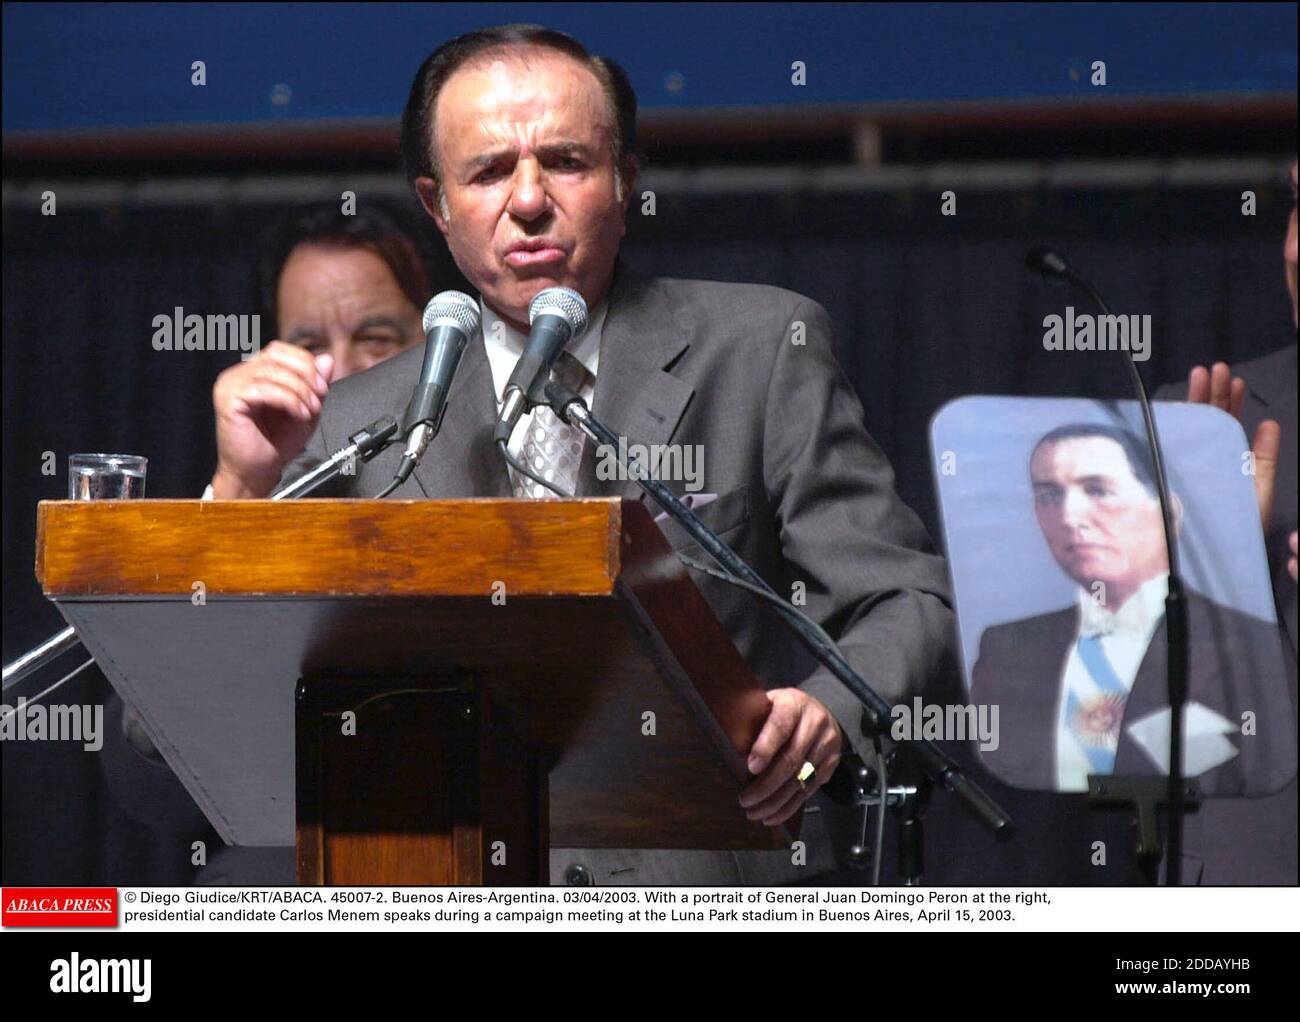 NO FILM, NO VIDEO, NO TV, NO DOCUMENTARY - © Diego Giudice/KRT/ABACA. 45007-2. Buenos Aires-Argentina. 15/04/2003. With a portrait of General Juan Domingo Peron at the right, presidential candidate Carlos Menem speaks during a campaign meeting at the Luna Park stadium in Buenos Aires, April 15, 20 Stock Photo